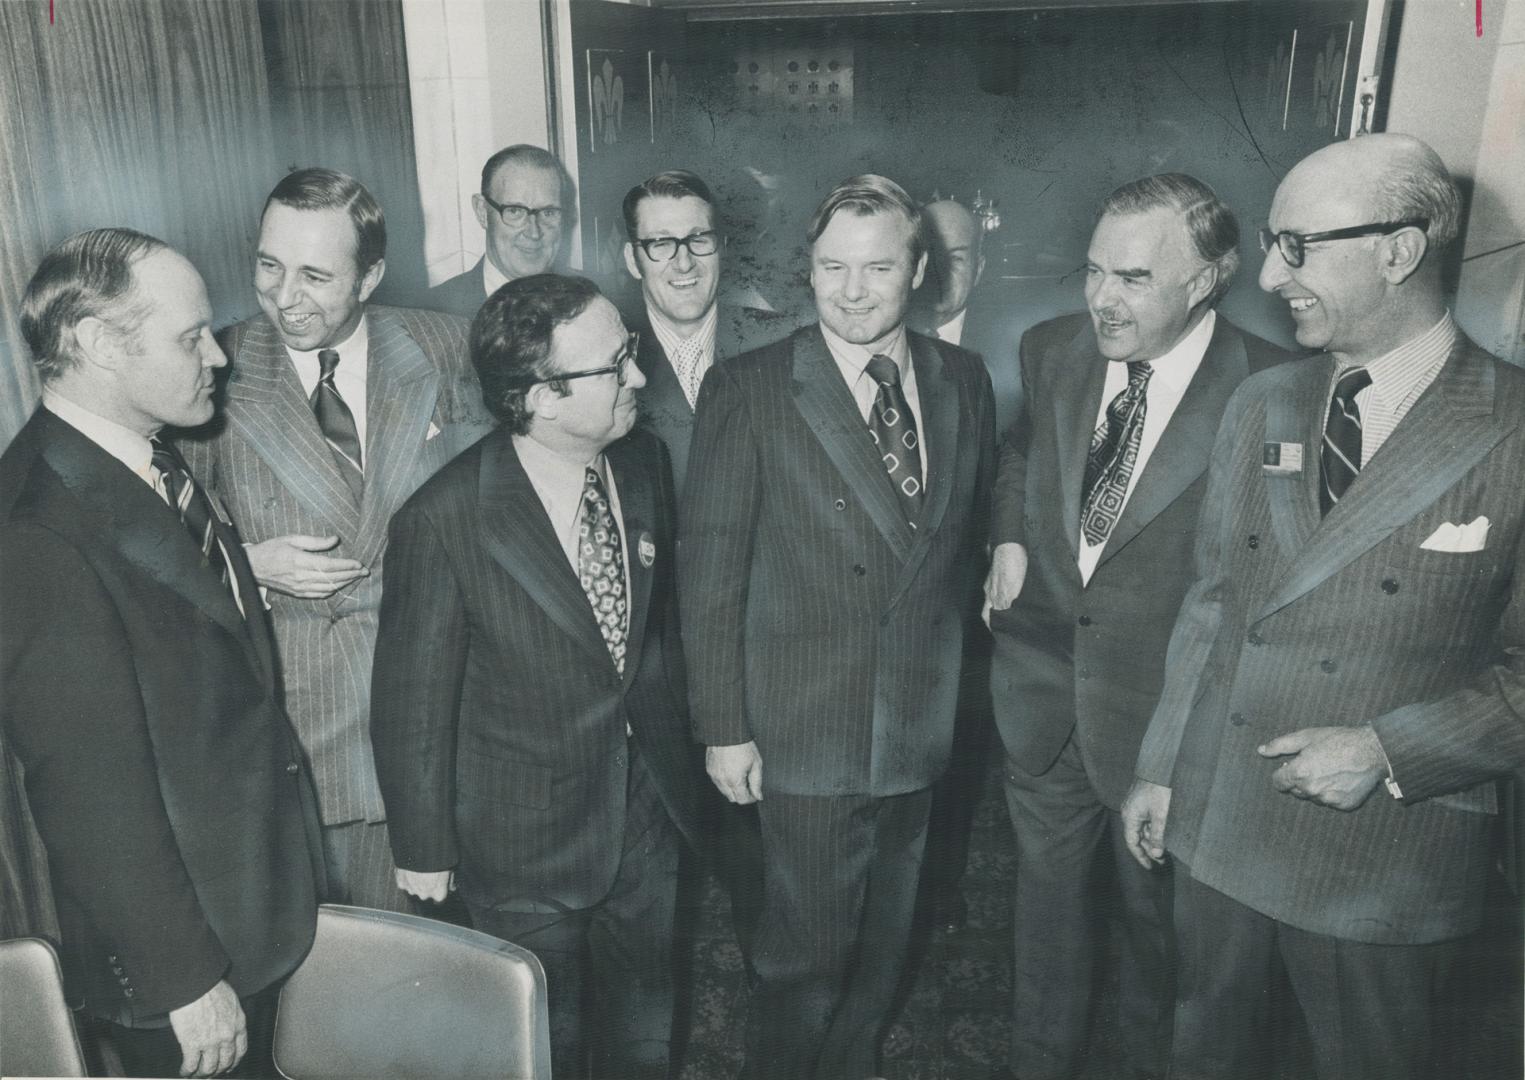 The premier and his boys (from left): Allan Lawrence, McKeough, Welch, Davis , Robarts, Bert Lawrence